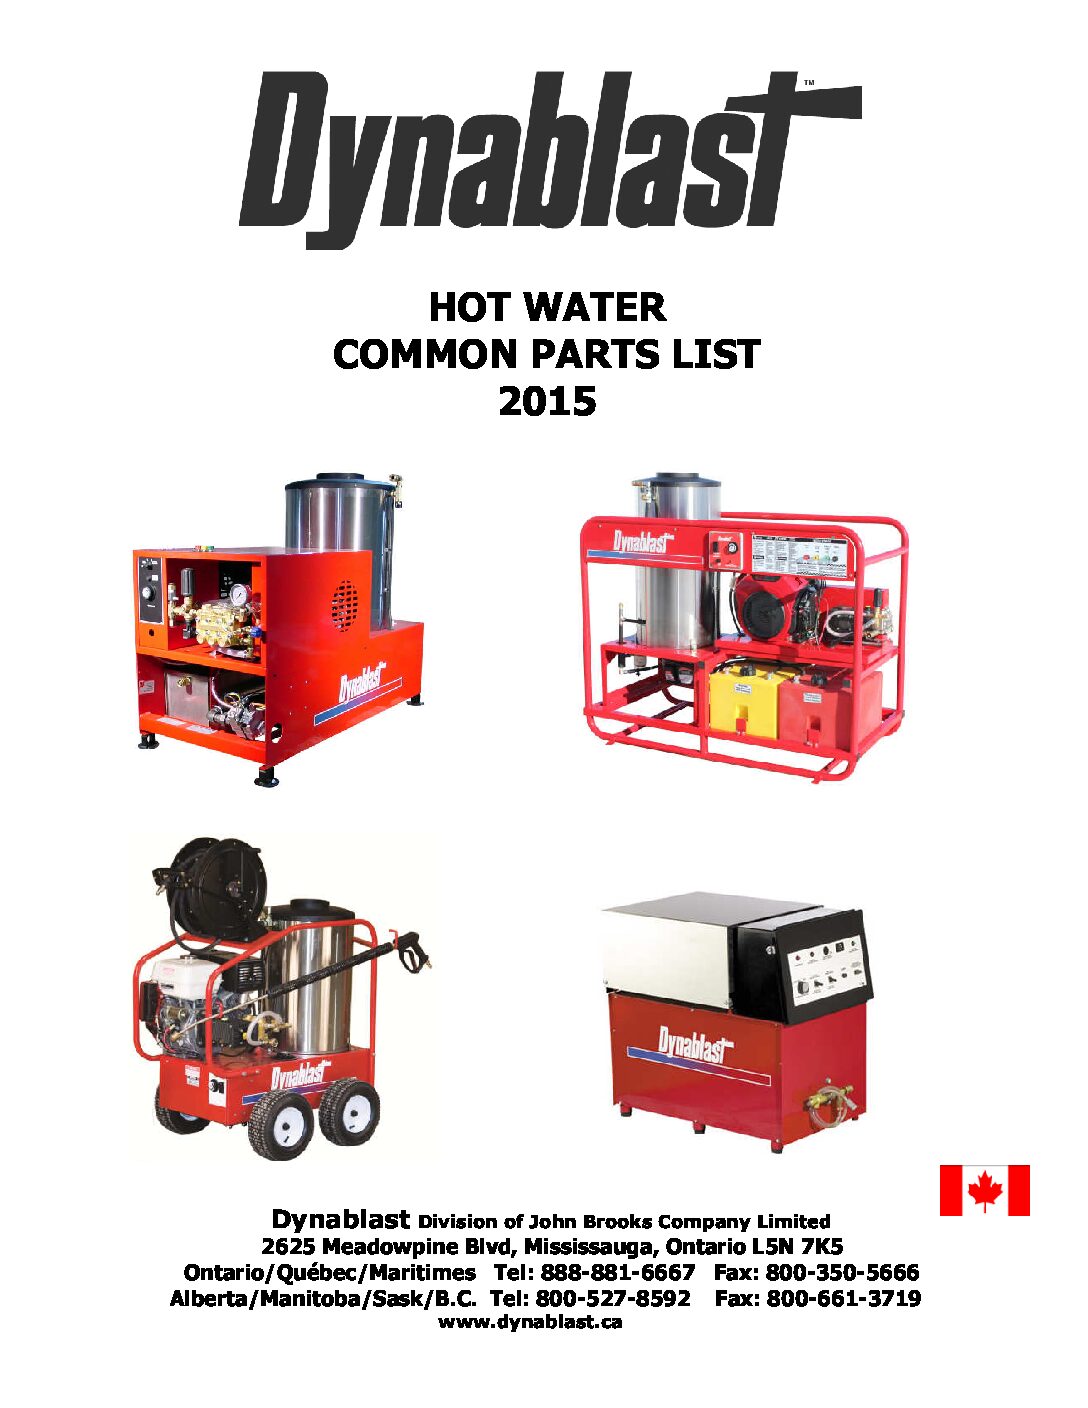 Dynblast Hot Water Parts